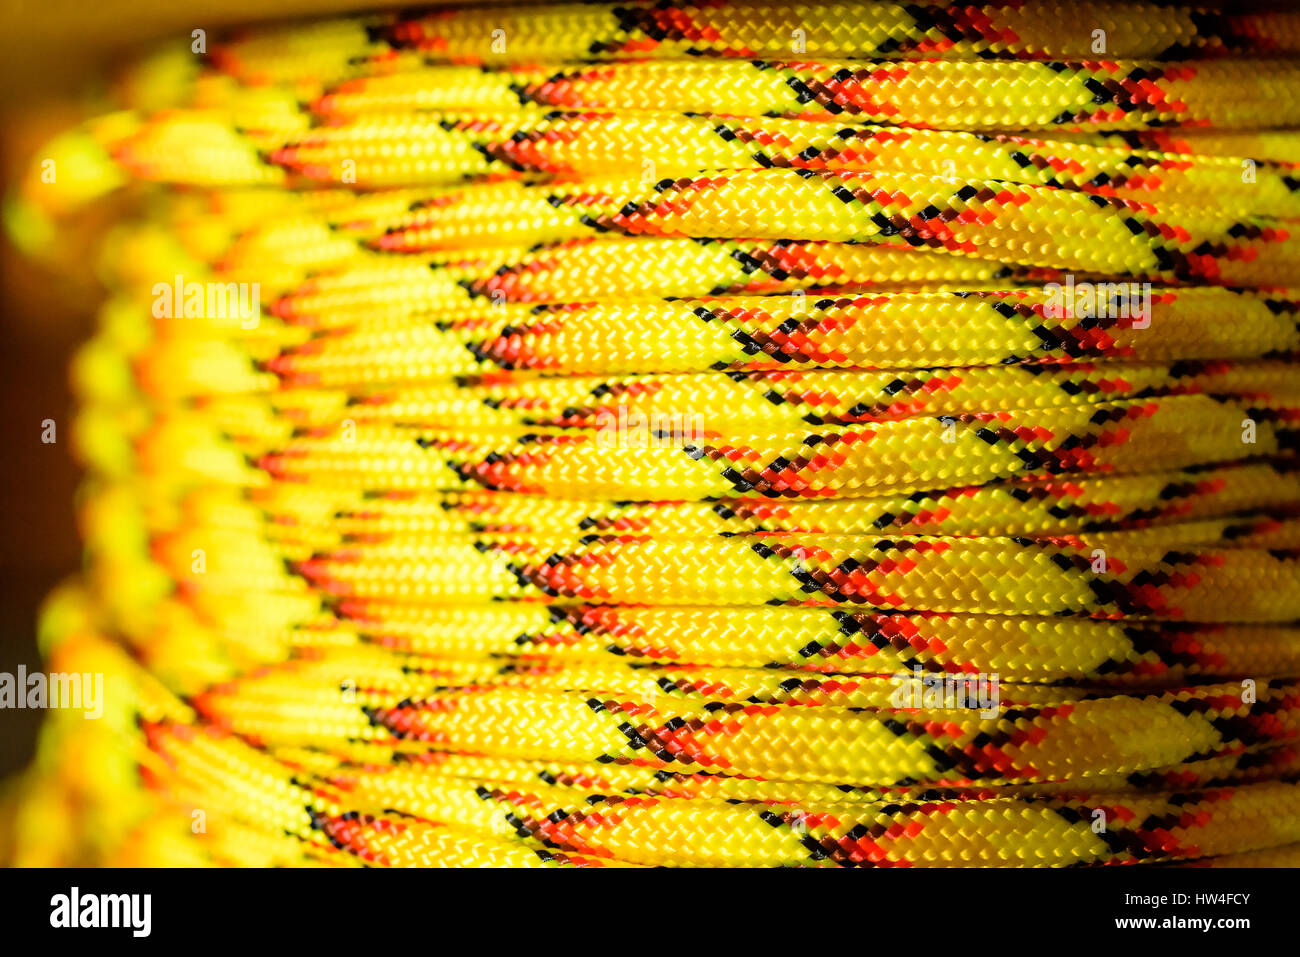 Parachute cord or paracord on spool. Yellow, red and black nylon